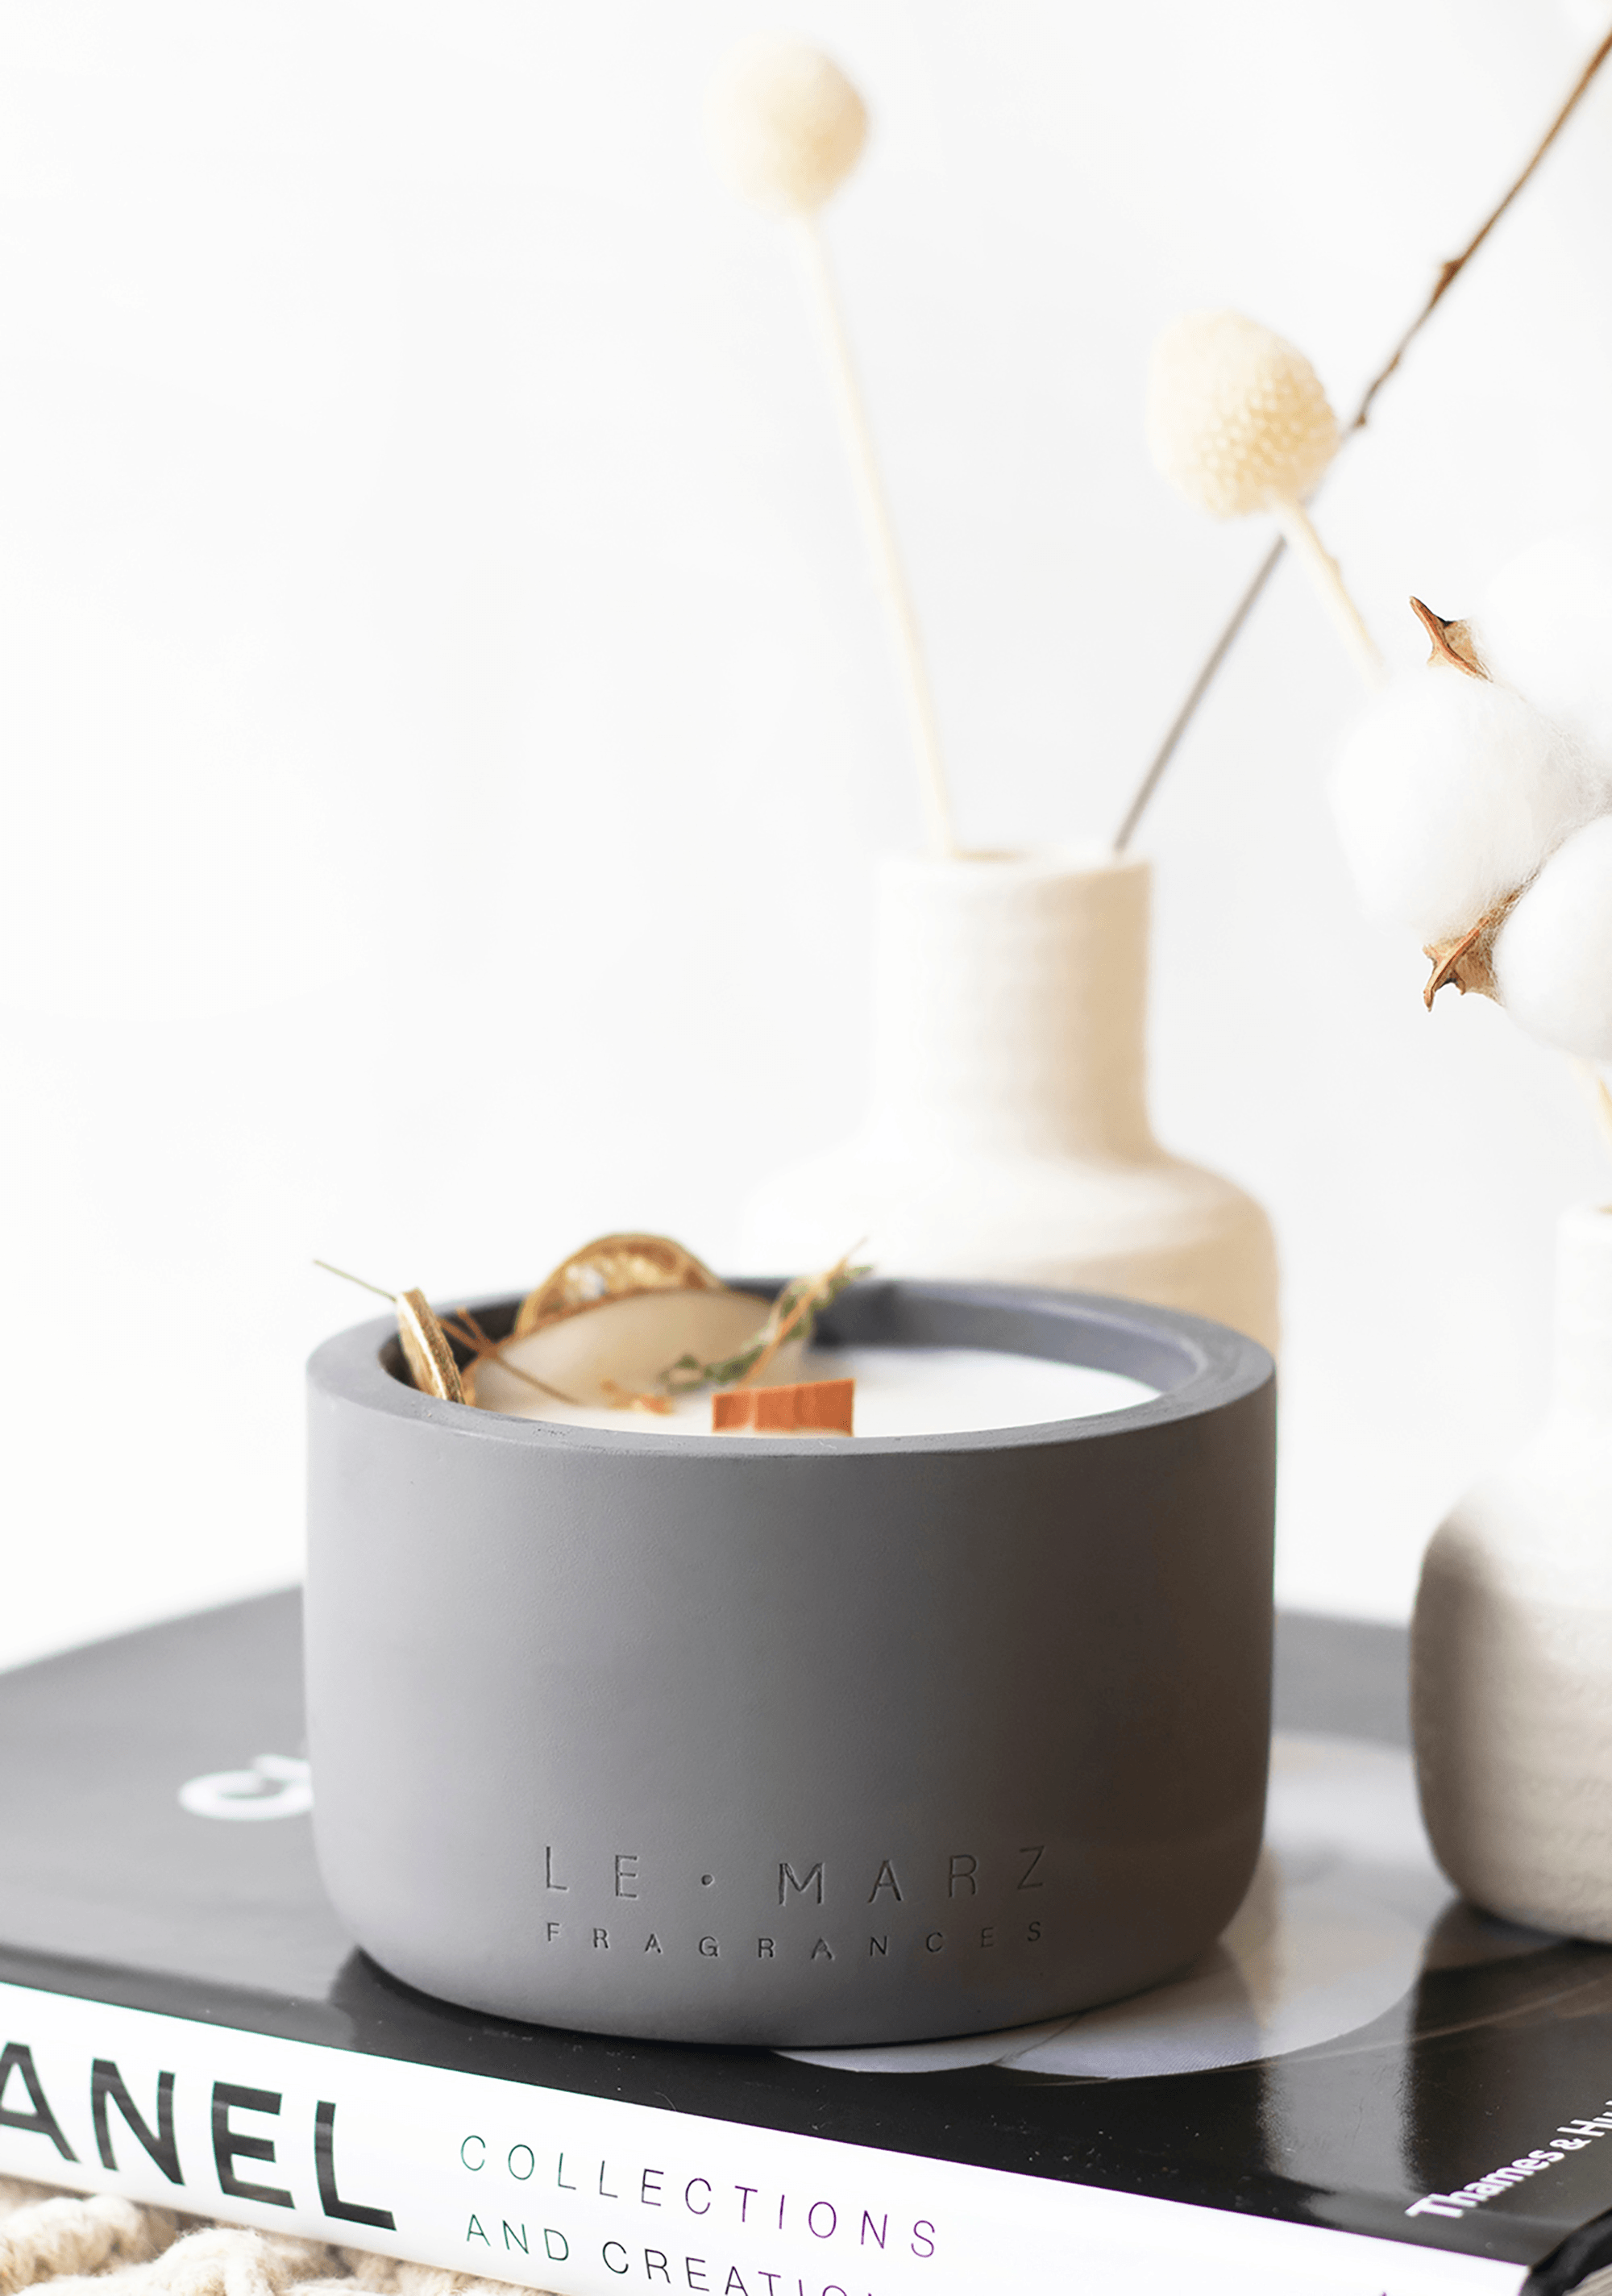 coconut and lime candle, wood wick, gift ideas, concrete candles, house warming gift, luxury candles, pretty candles, grey candle, home decor, vegan candles, coconut wax candle, wood wick candle, candles